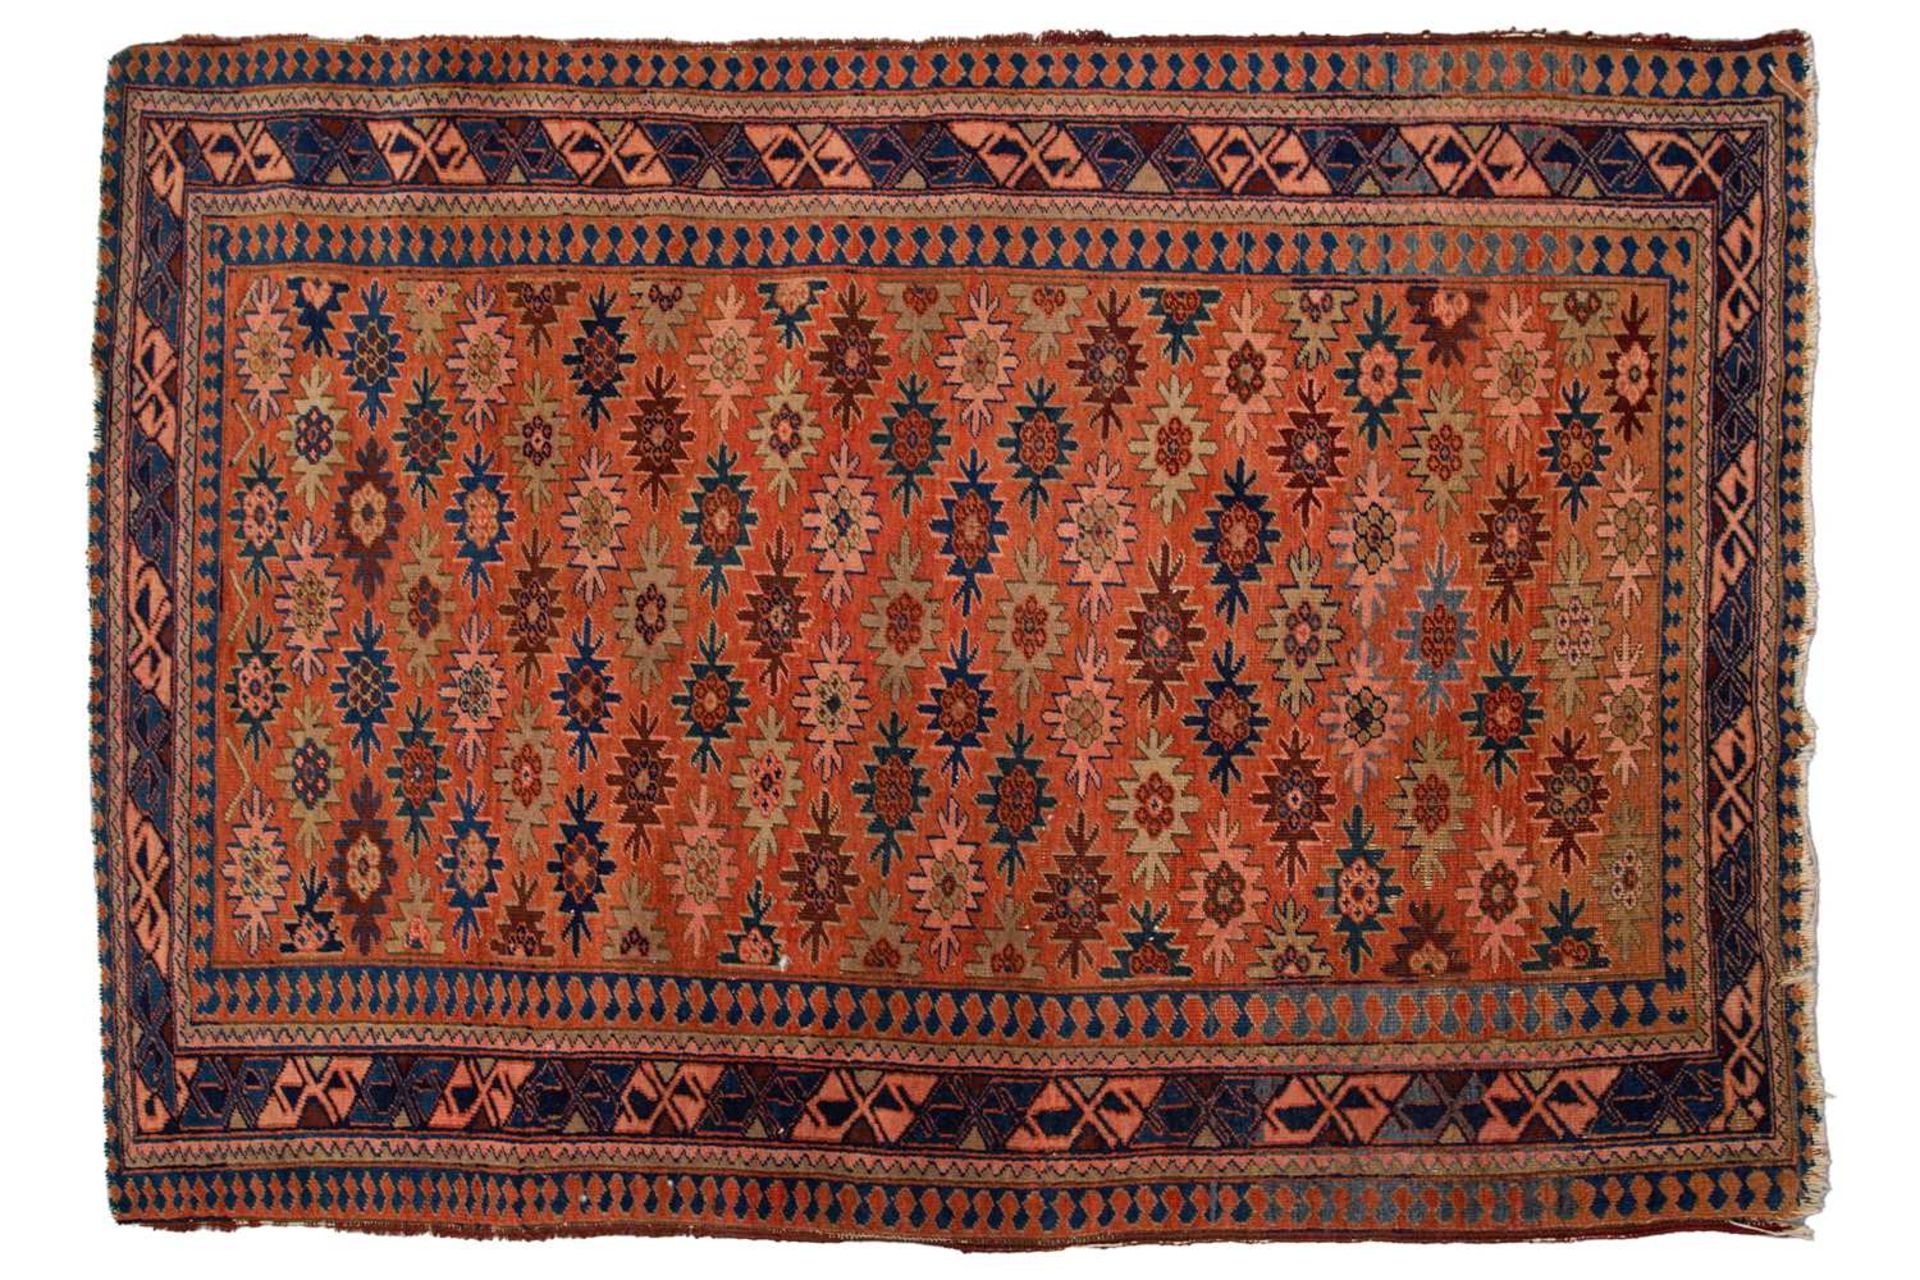 A Caucasian rug with overall star decoration on a muted red ground, probably early 20th-century